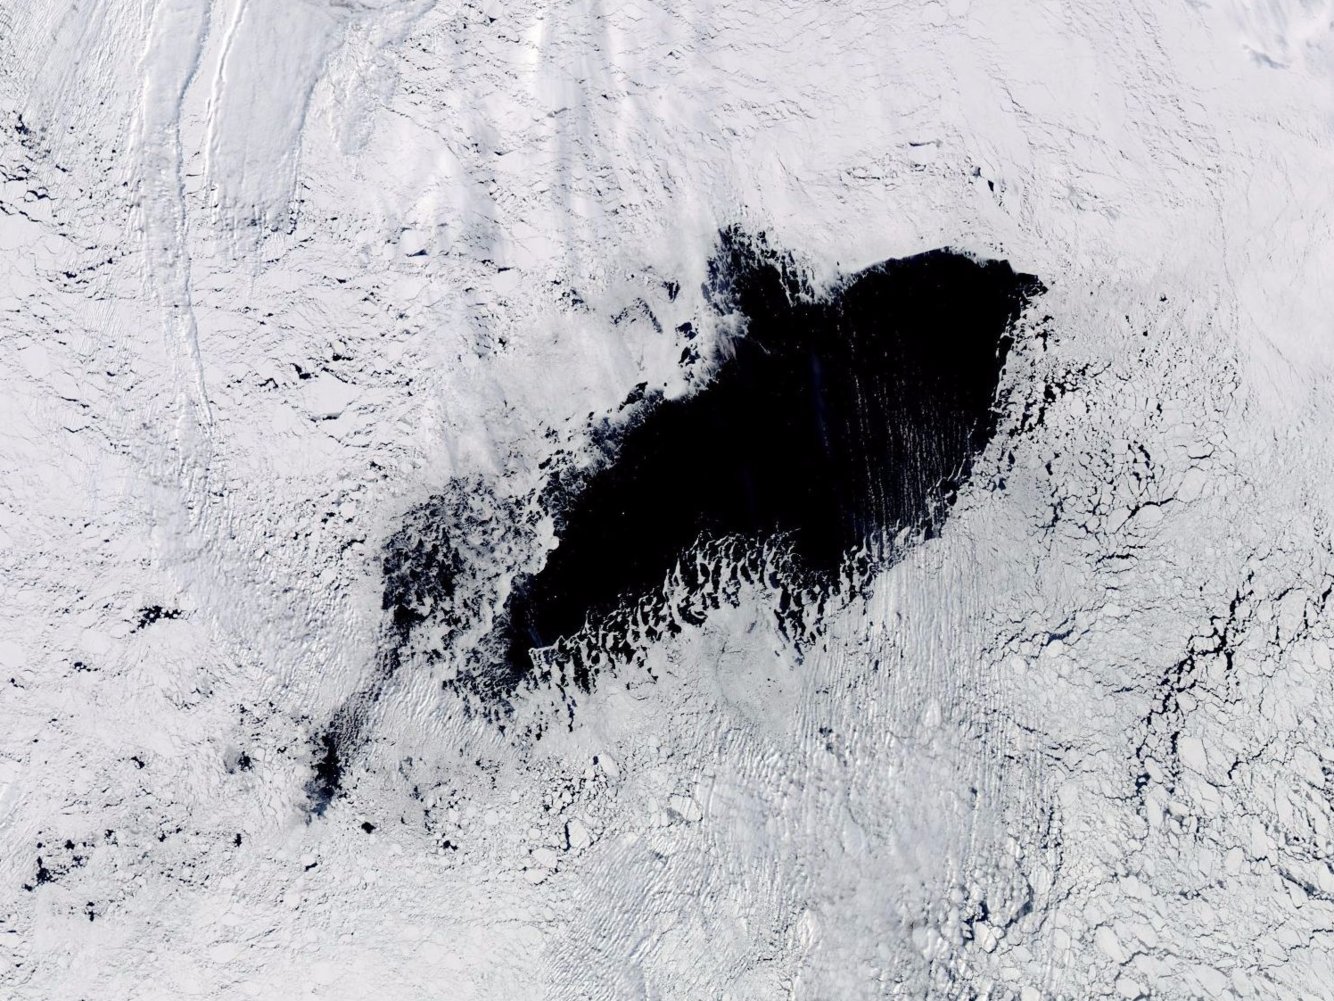 What caused a massive hole in Antarctic sea ice?